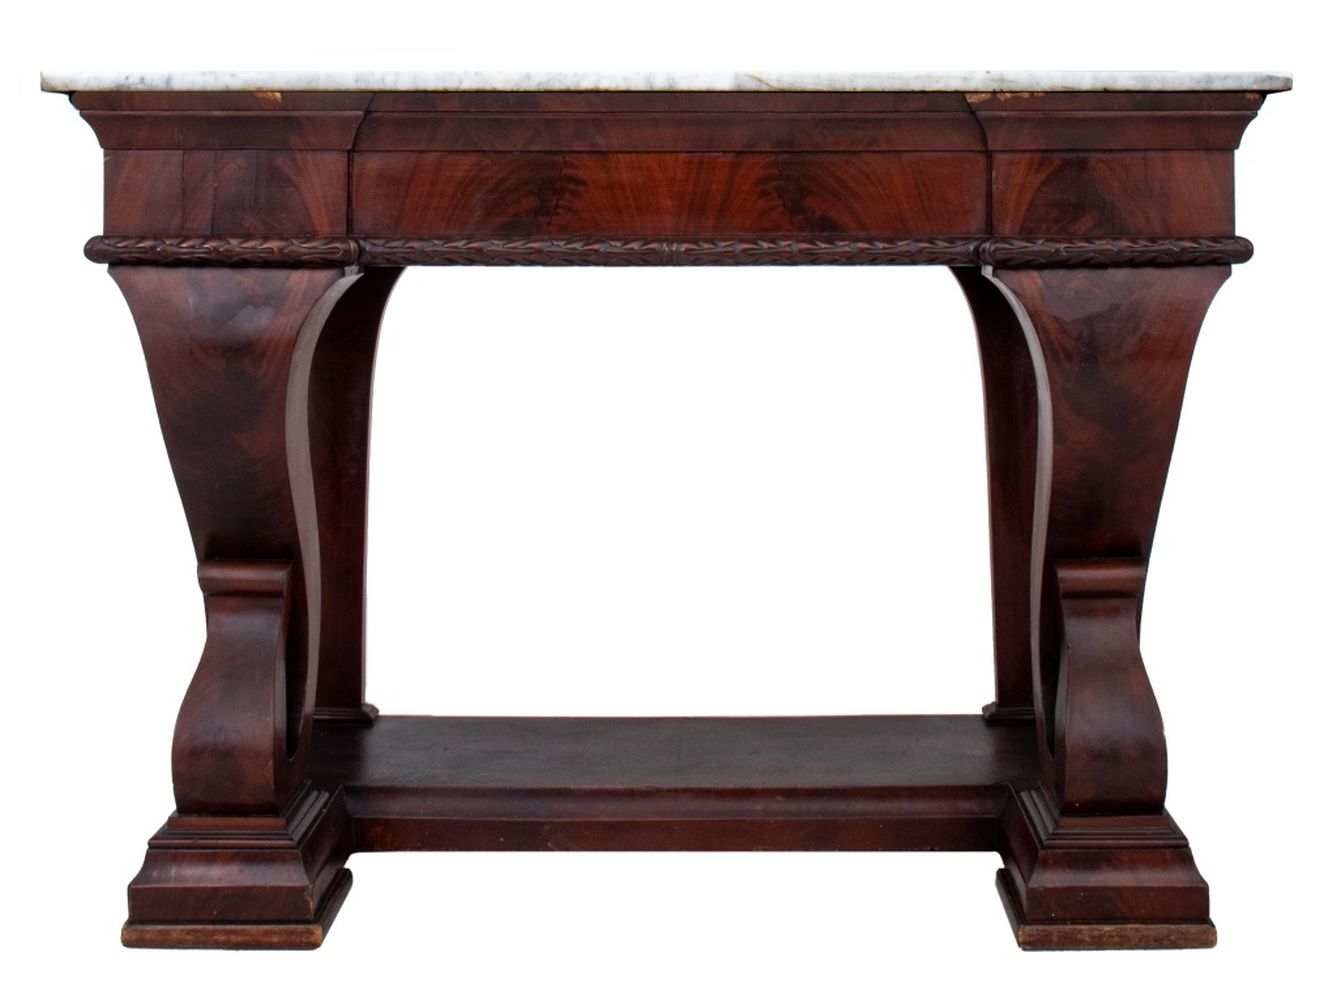 AMERICAN EMPIRE CONSOLE, LIKELY